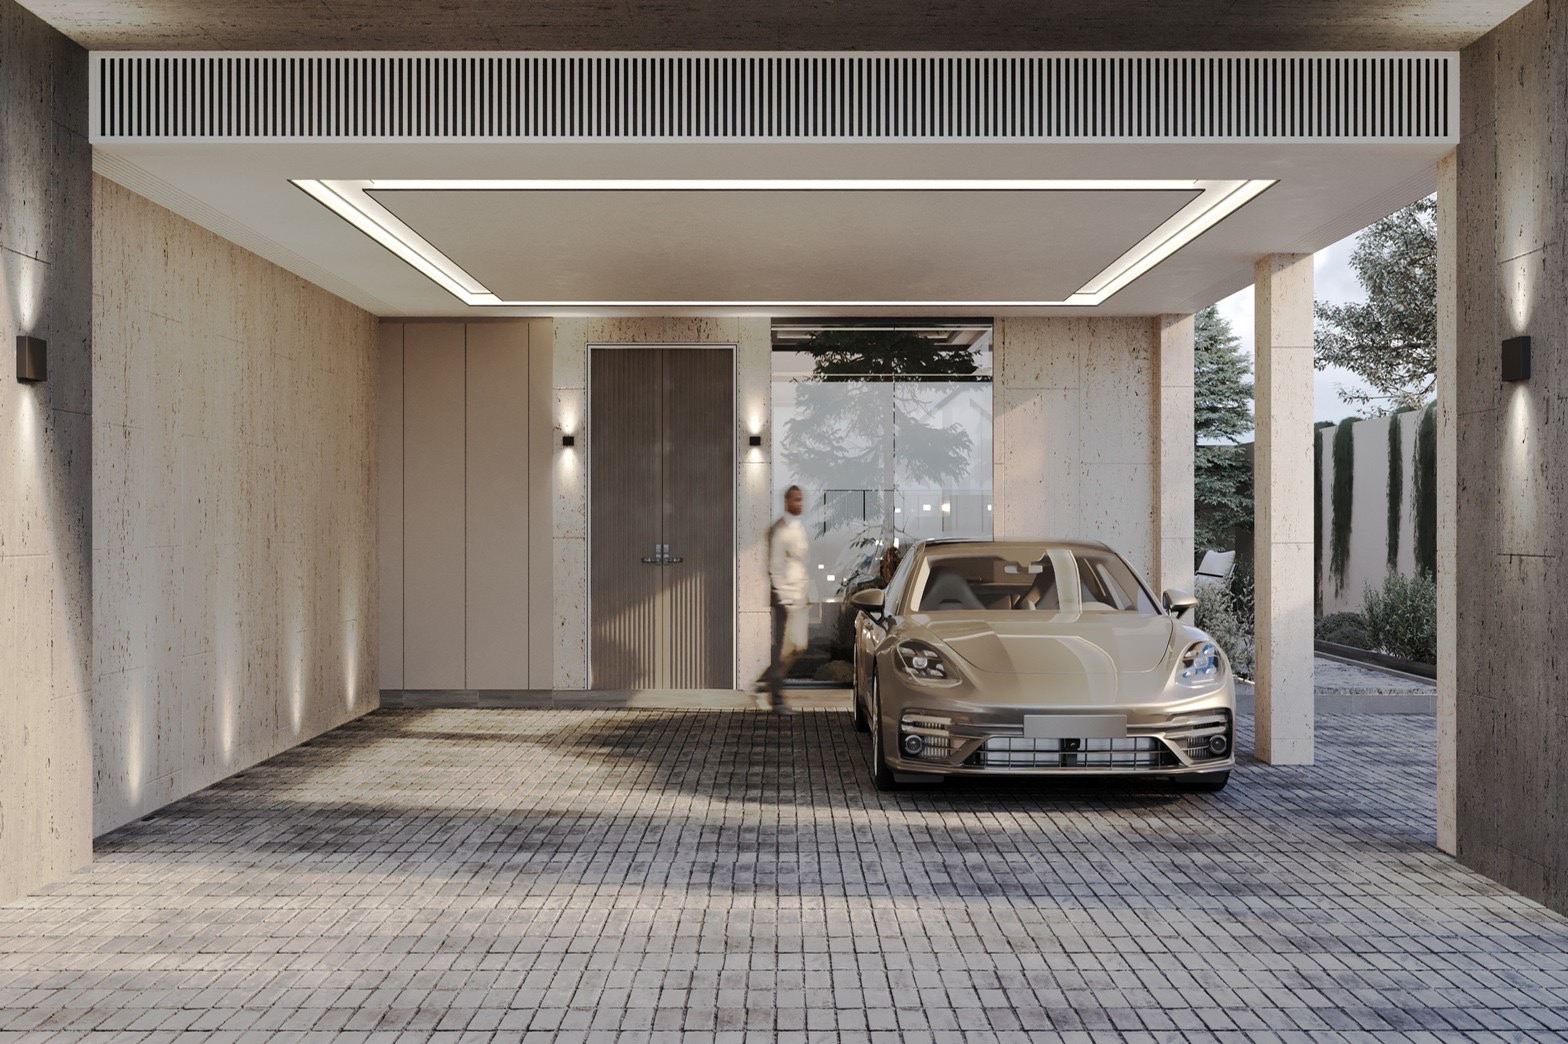 Private lift, Courtyard and Parking